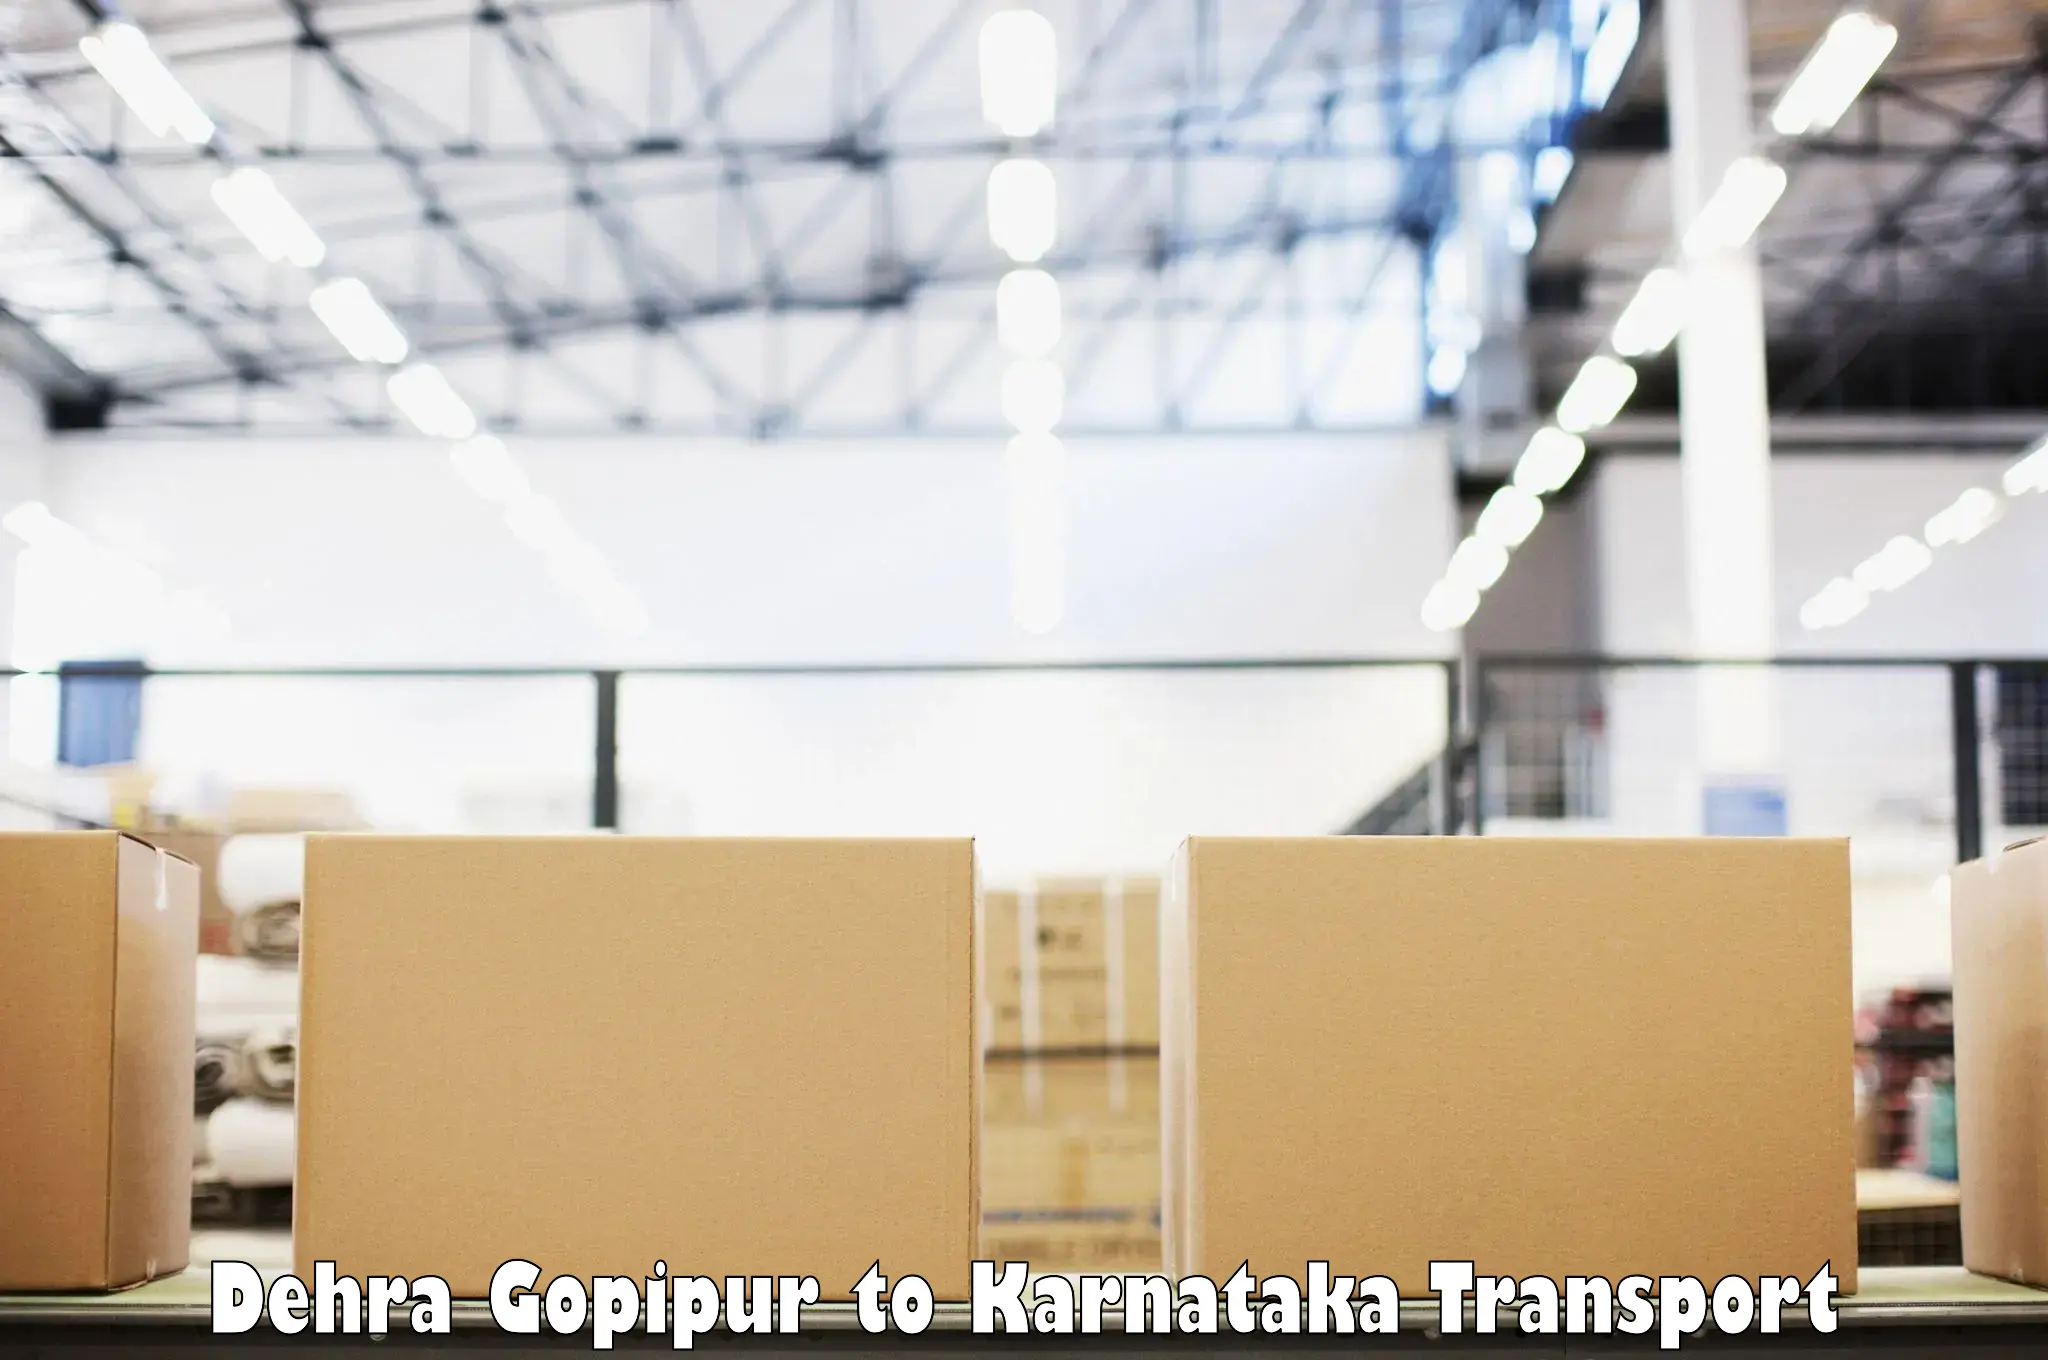 Truck transport companies in India Dehra Gopipur to Sirsi